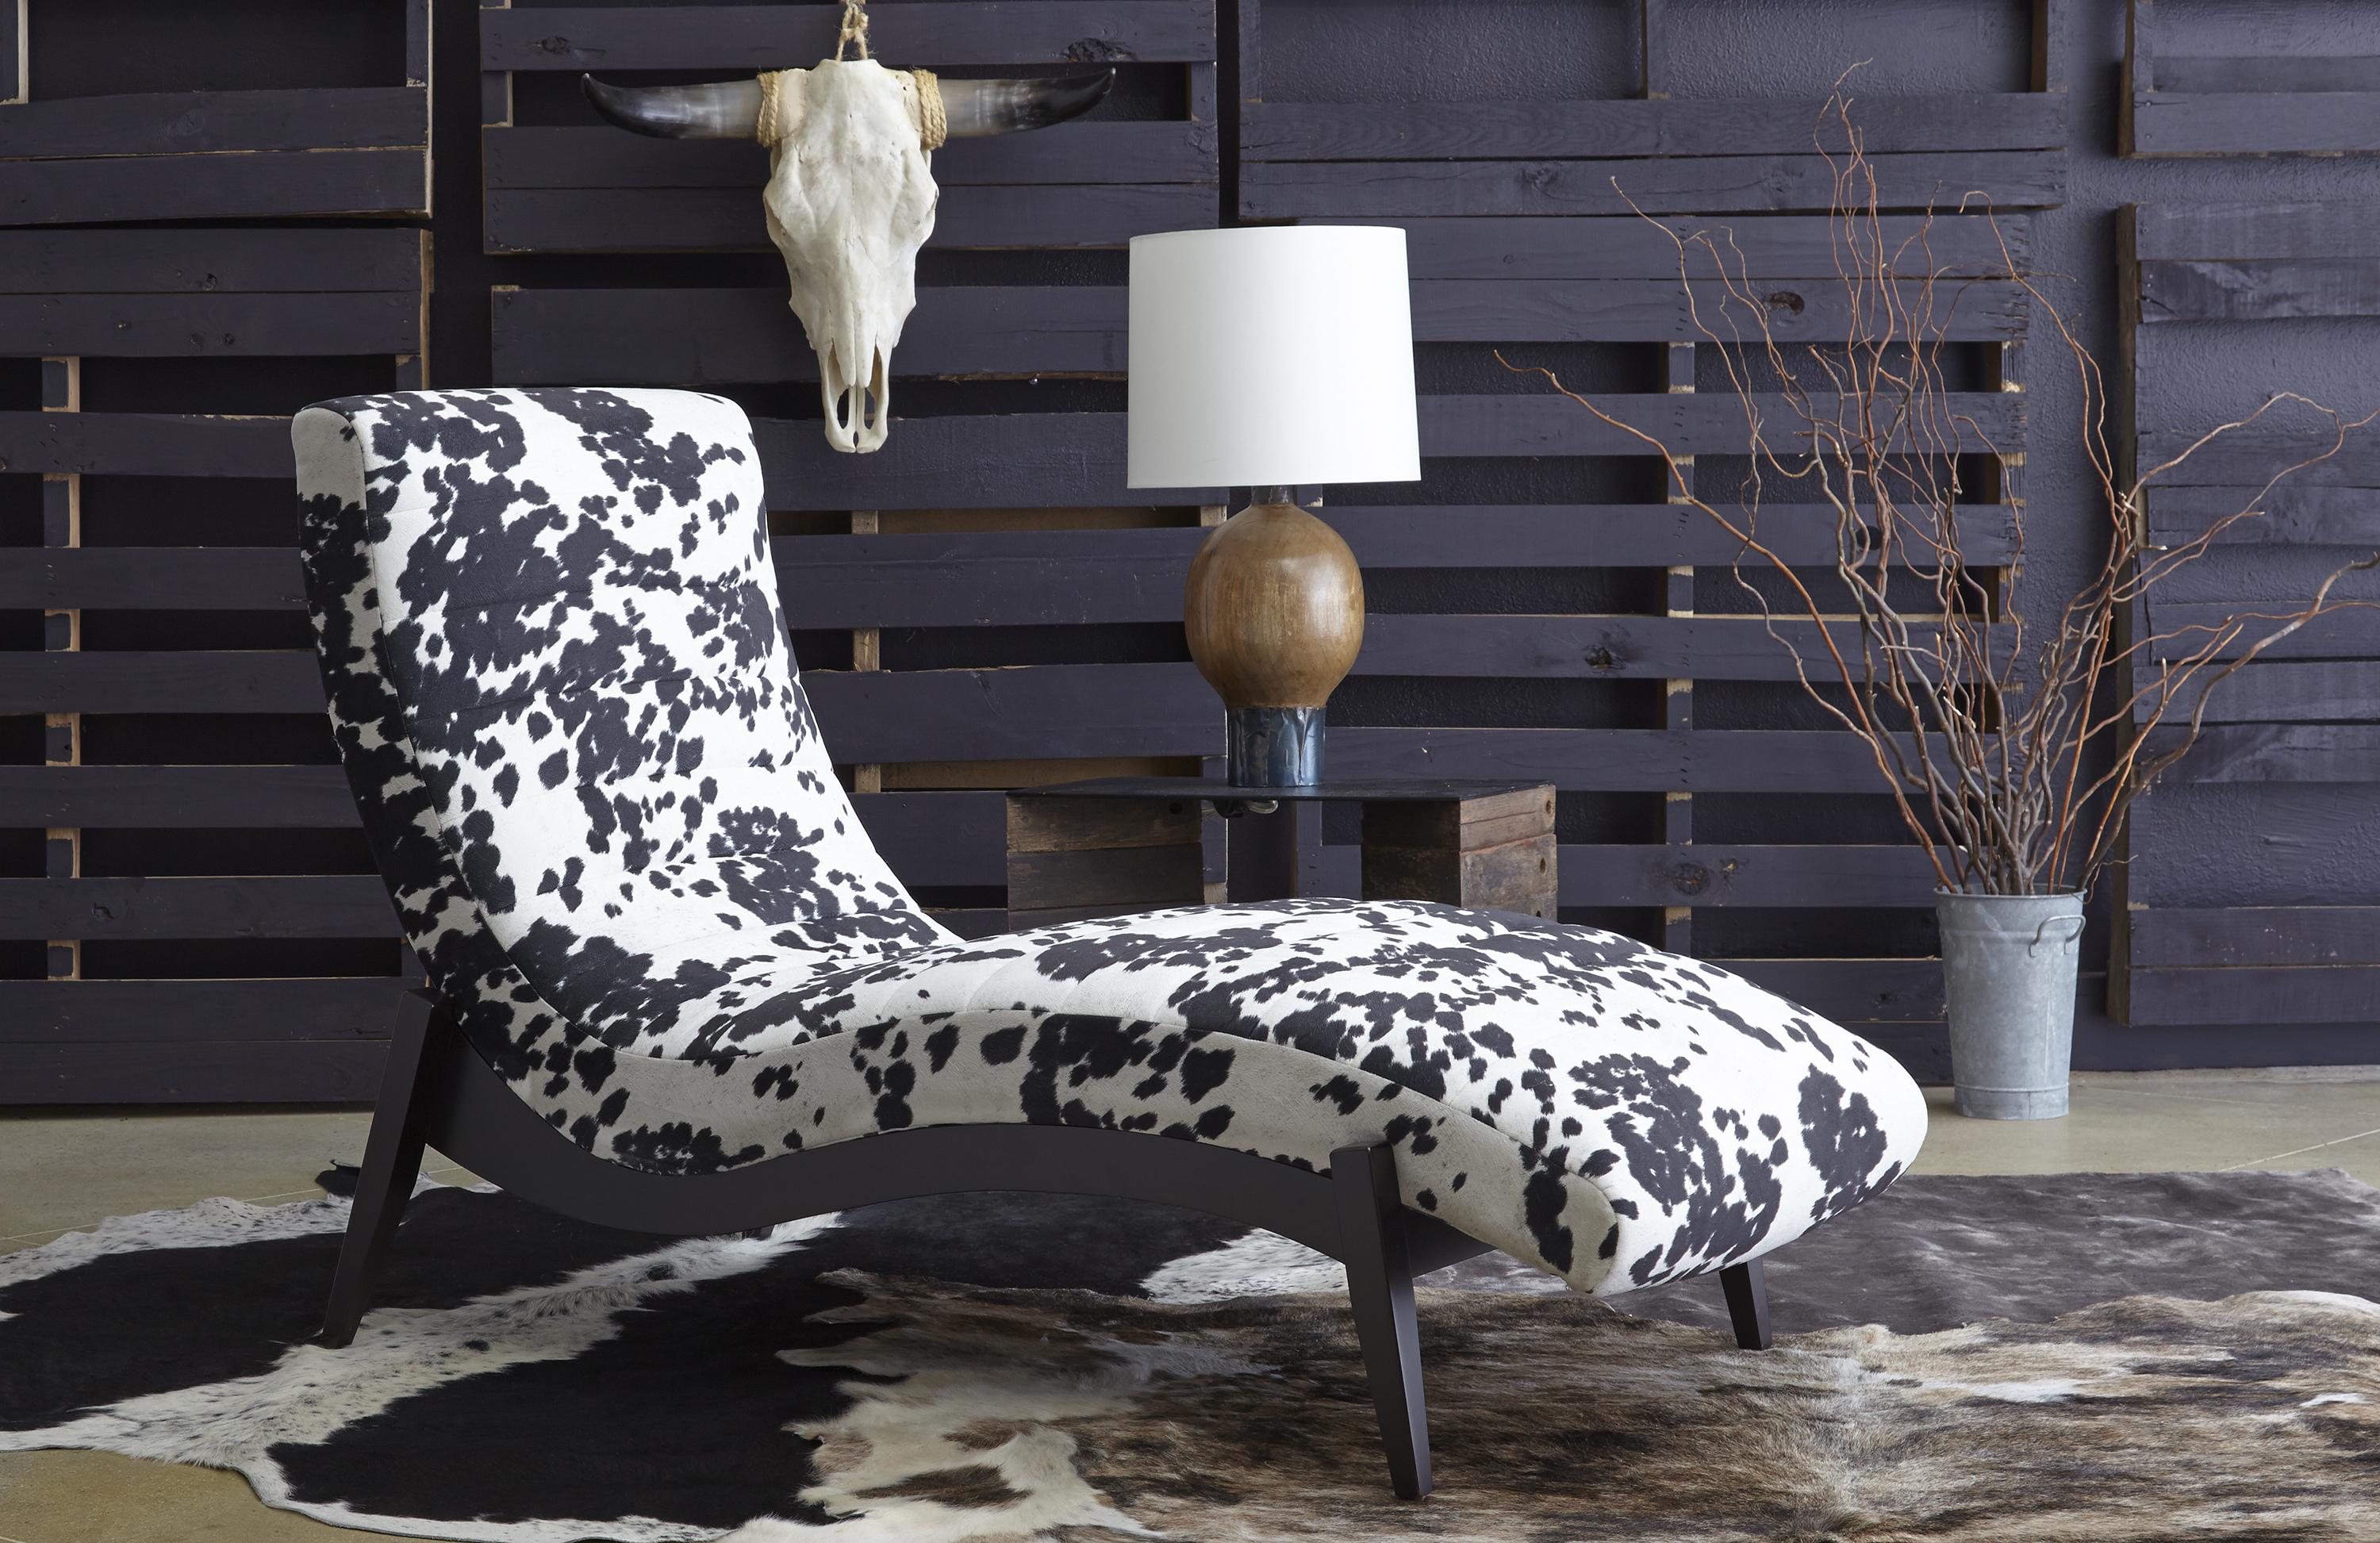 black and white cowhide spotted harlowe-lounger in western themed room